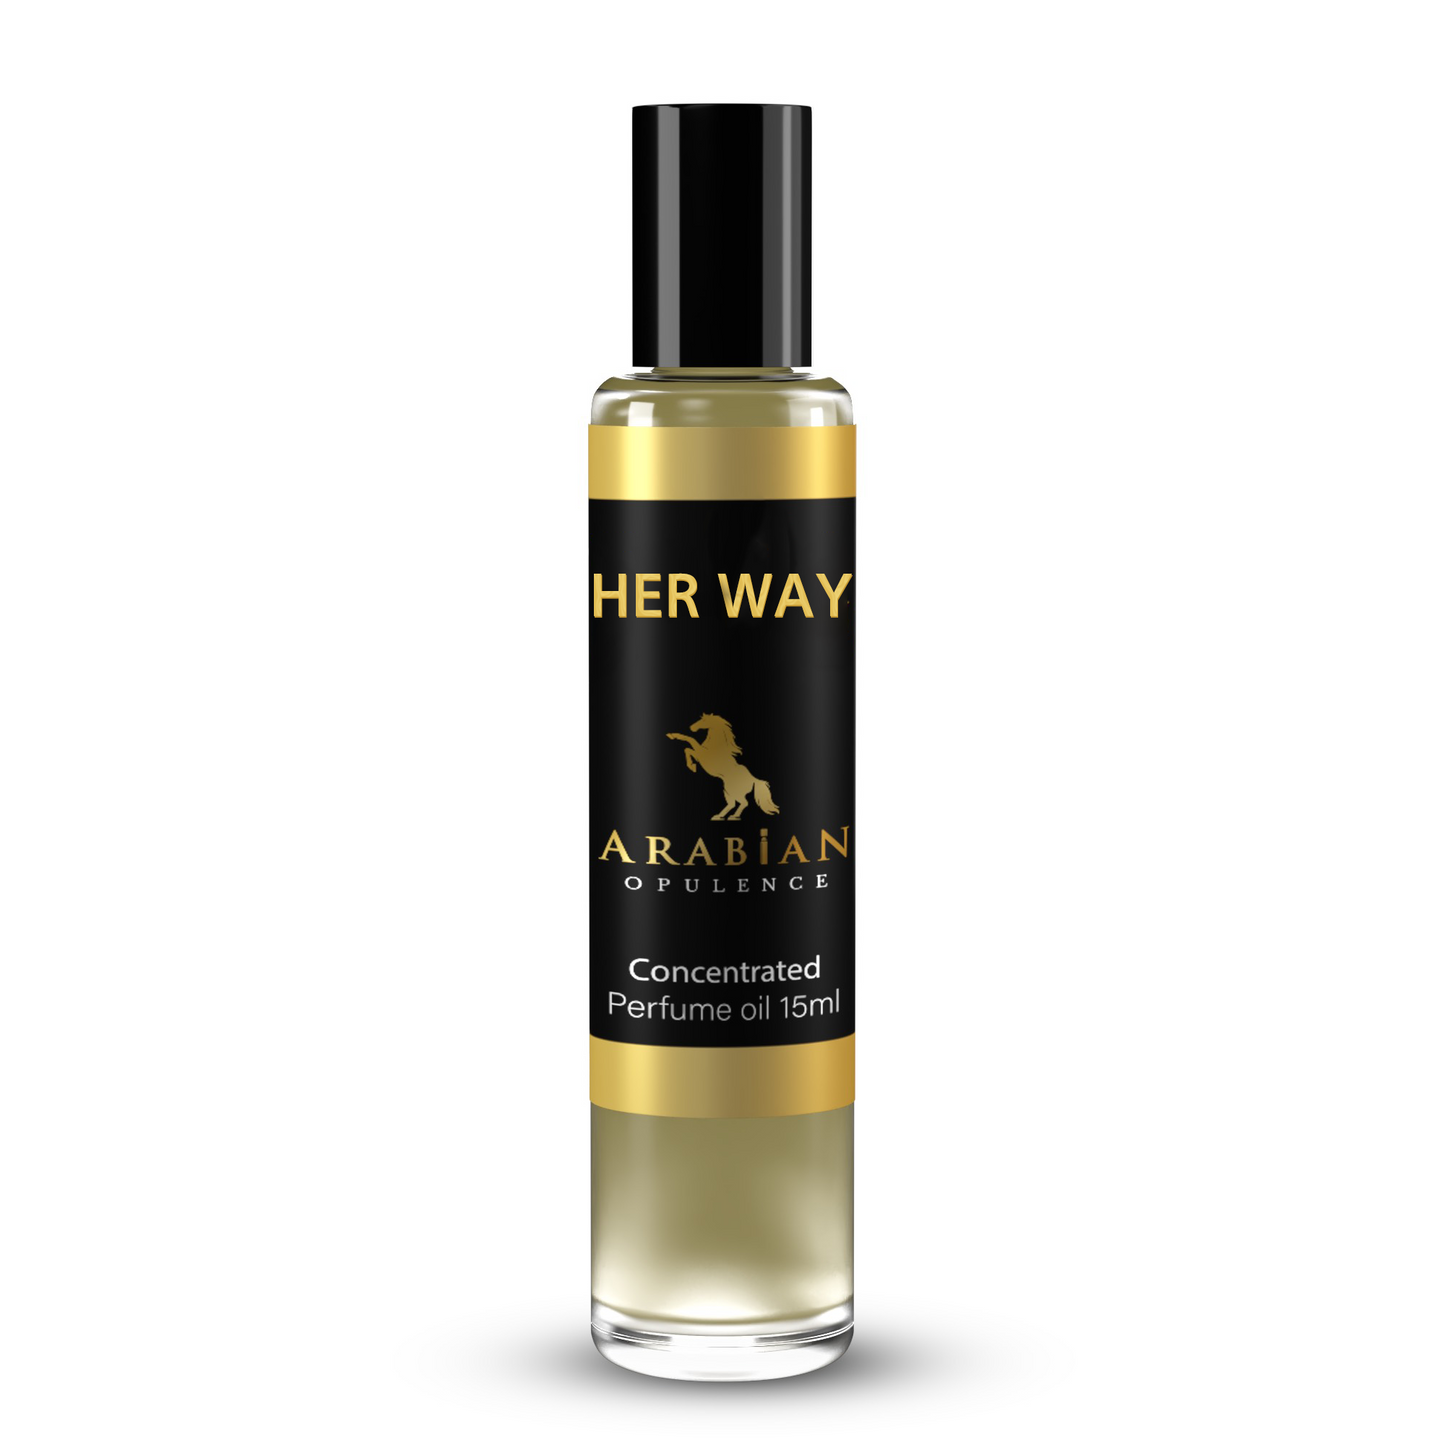 FR19 HER WAY - Perfume Body Oil - Alcohol Free